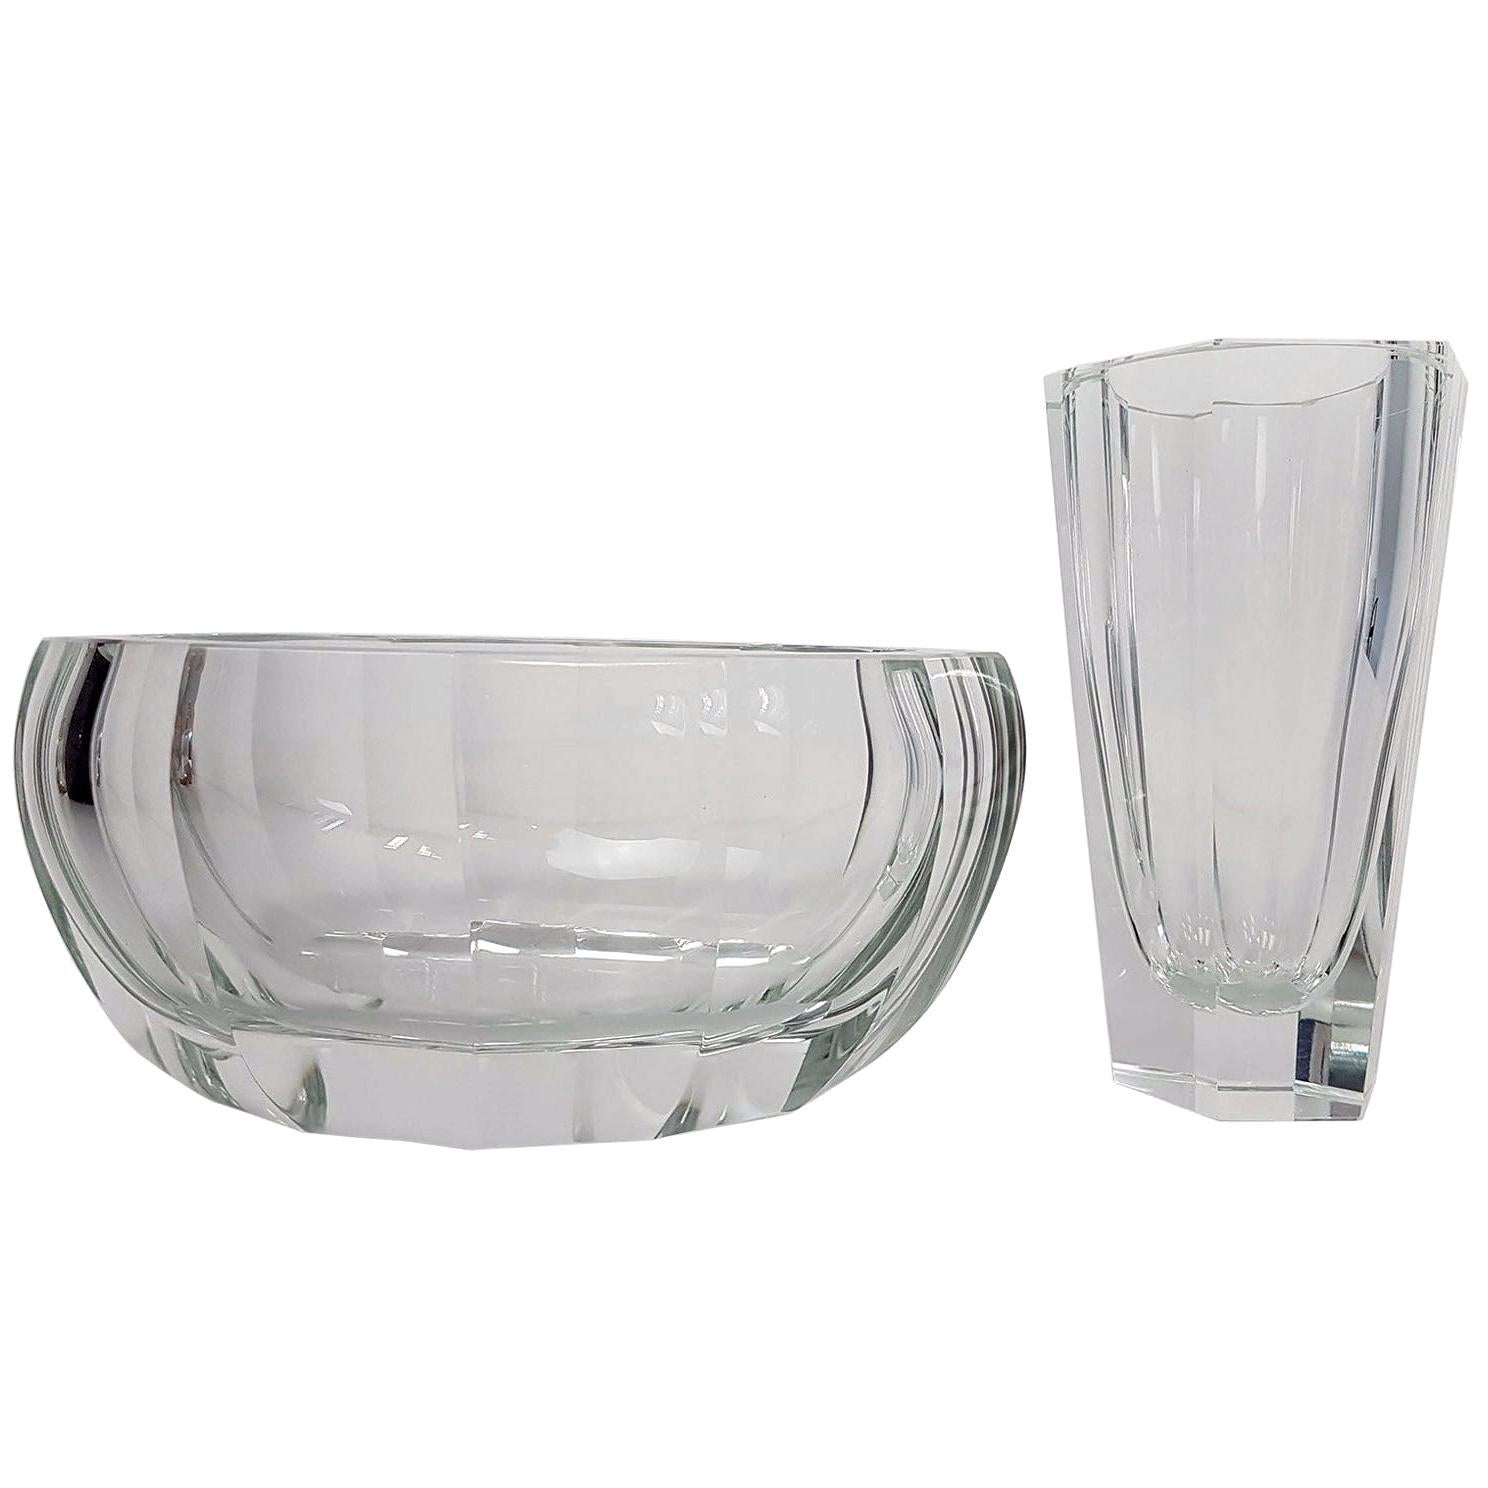 Moser Crystal Purity Clear Glass Set 'Bowl and Vase', Early 20th Century For Sale